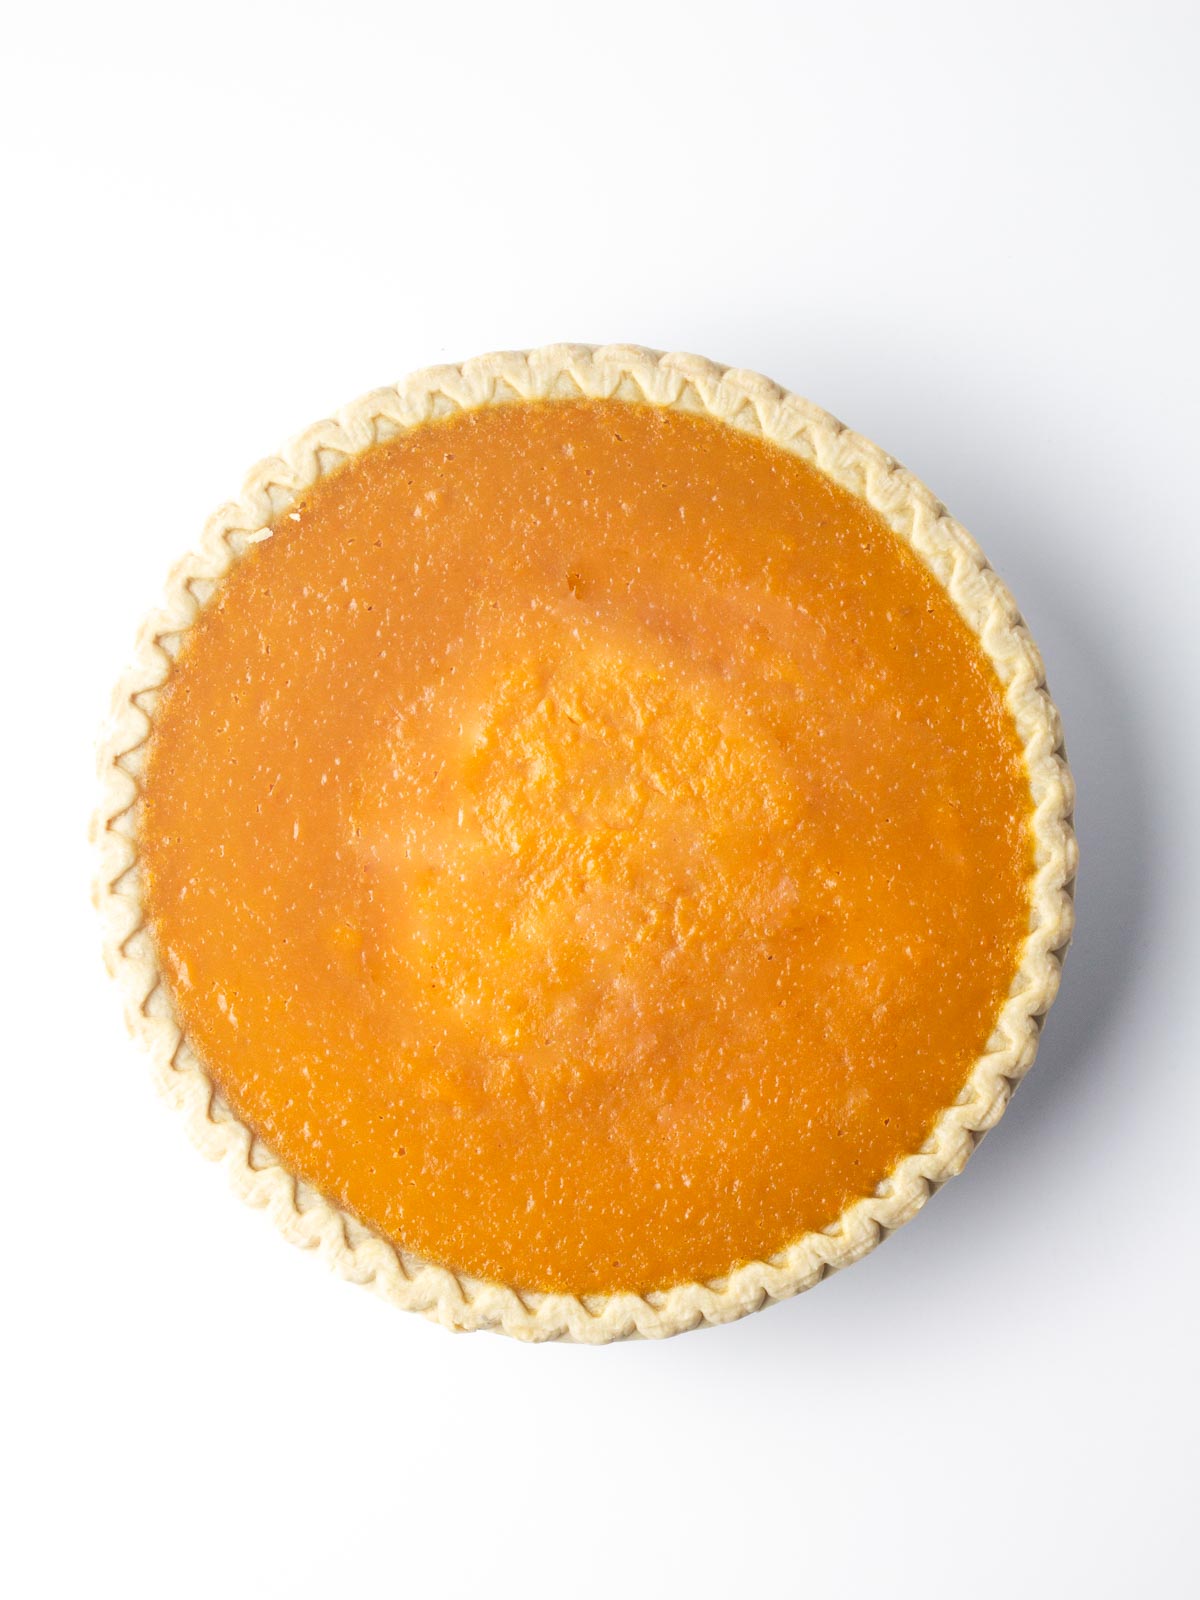 Top down view of a baked sweet potato pie.